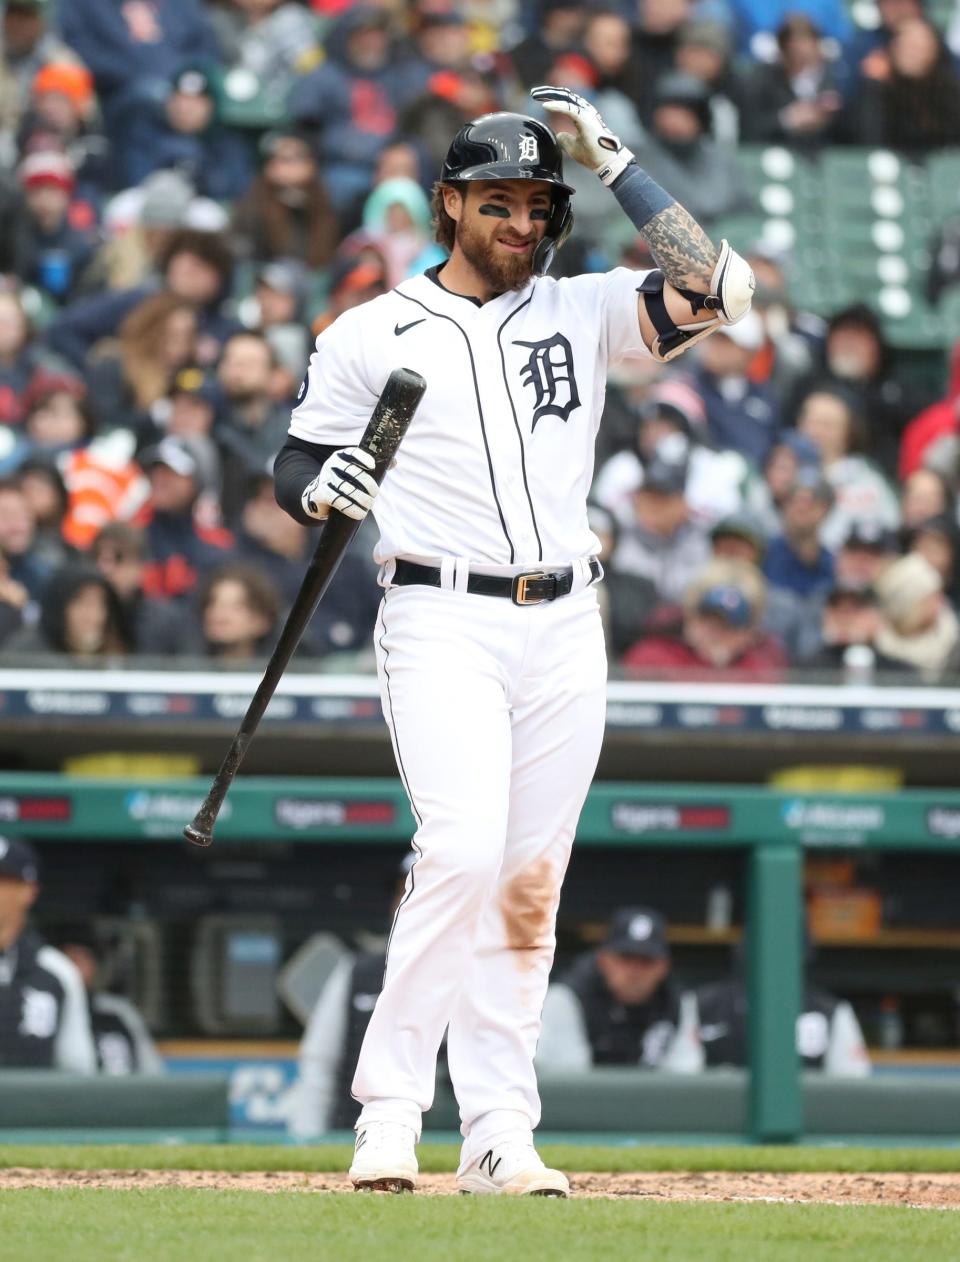 Tigers catcher Eric Haase bats against White Sox reliever Reynaldo Lopez during the sixth inning on Saturday, April 9, 2022, at Comerica Park.